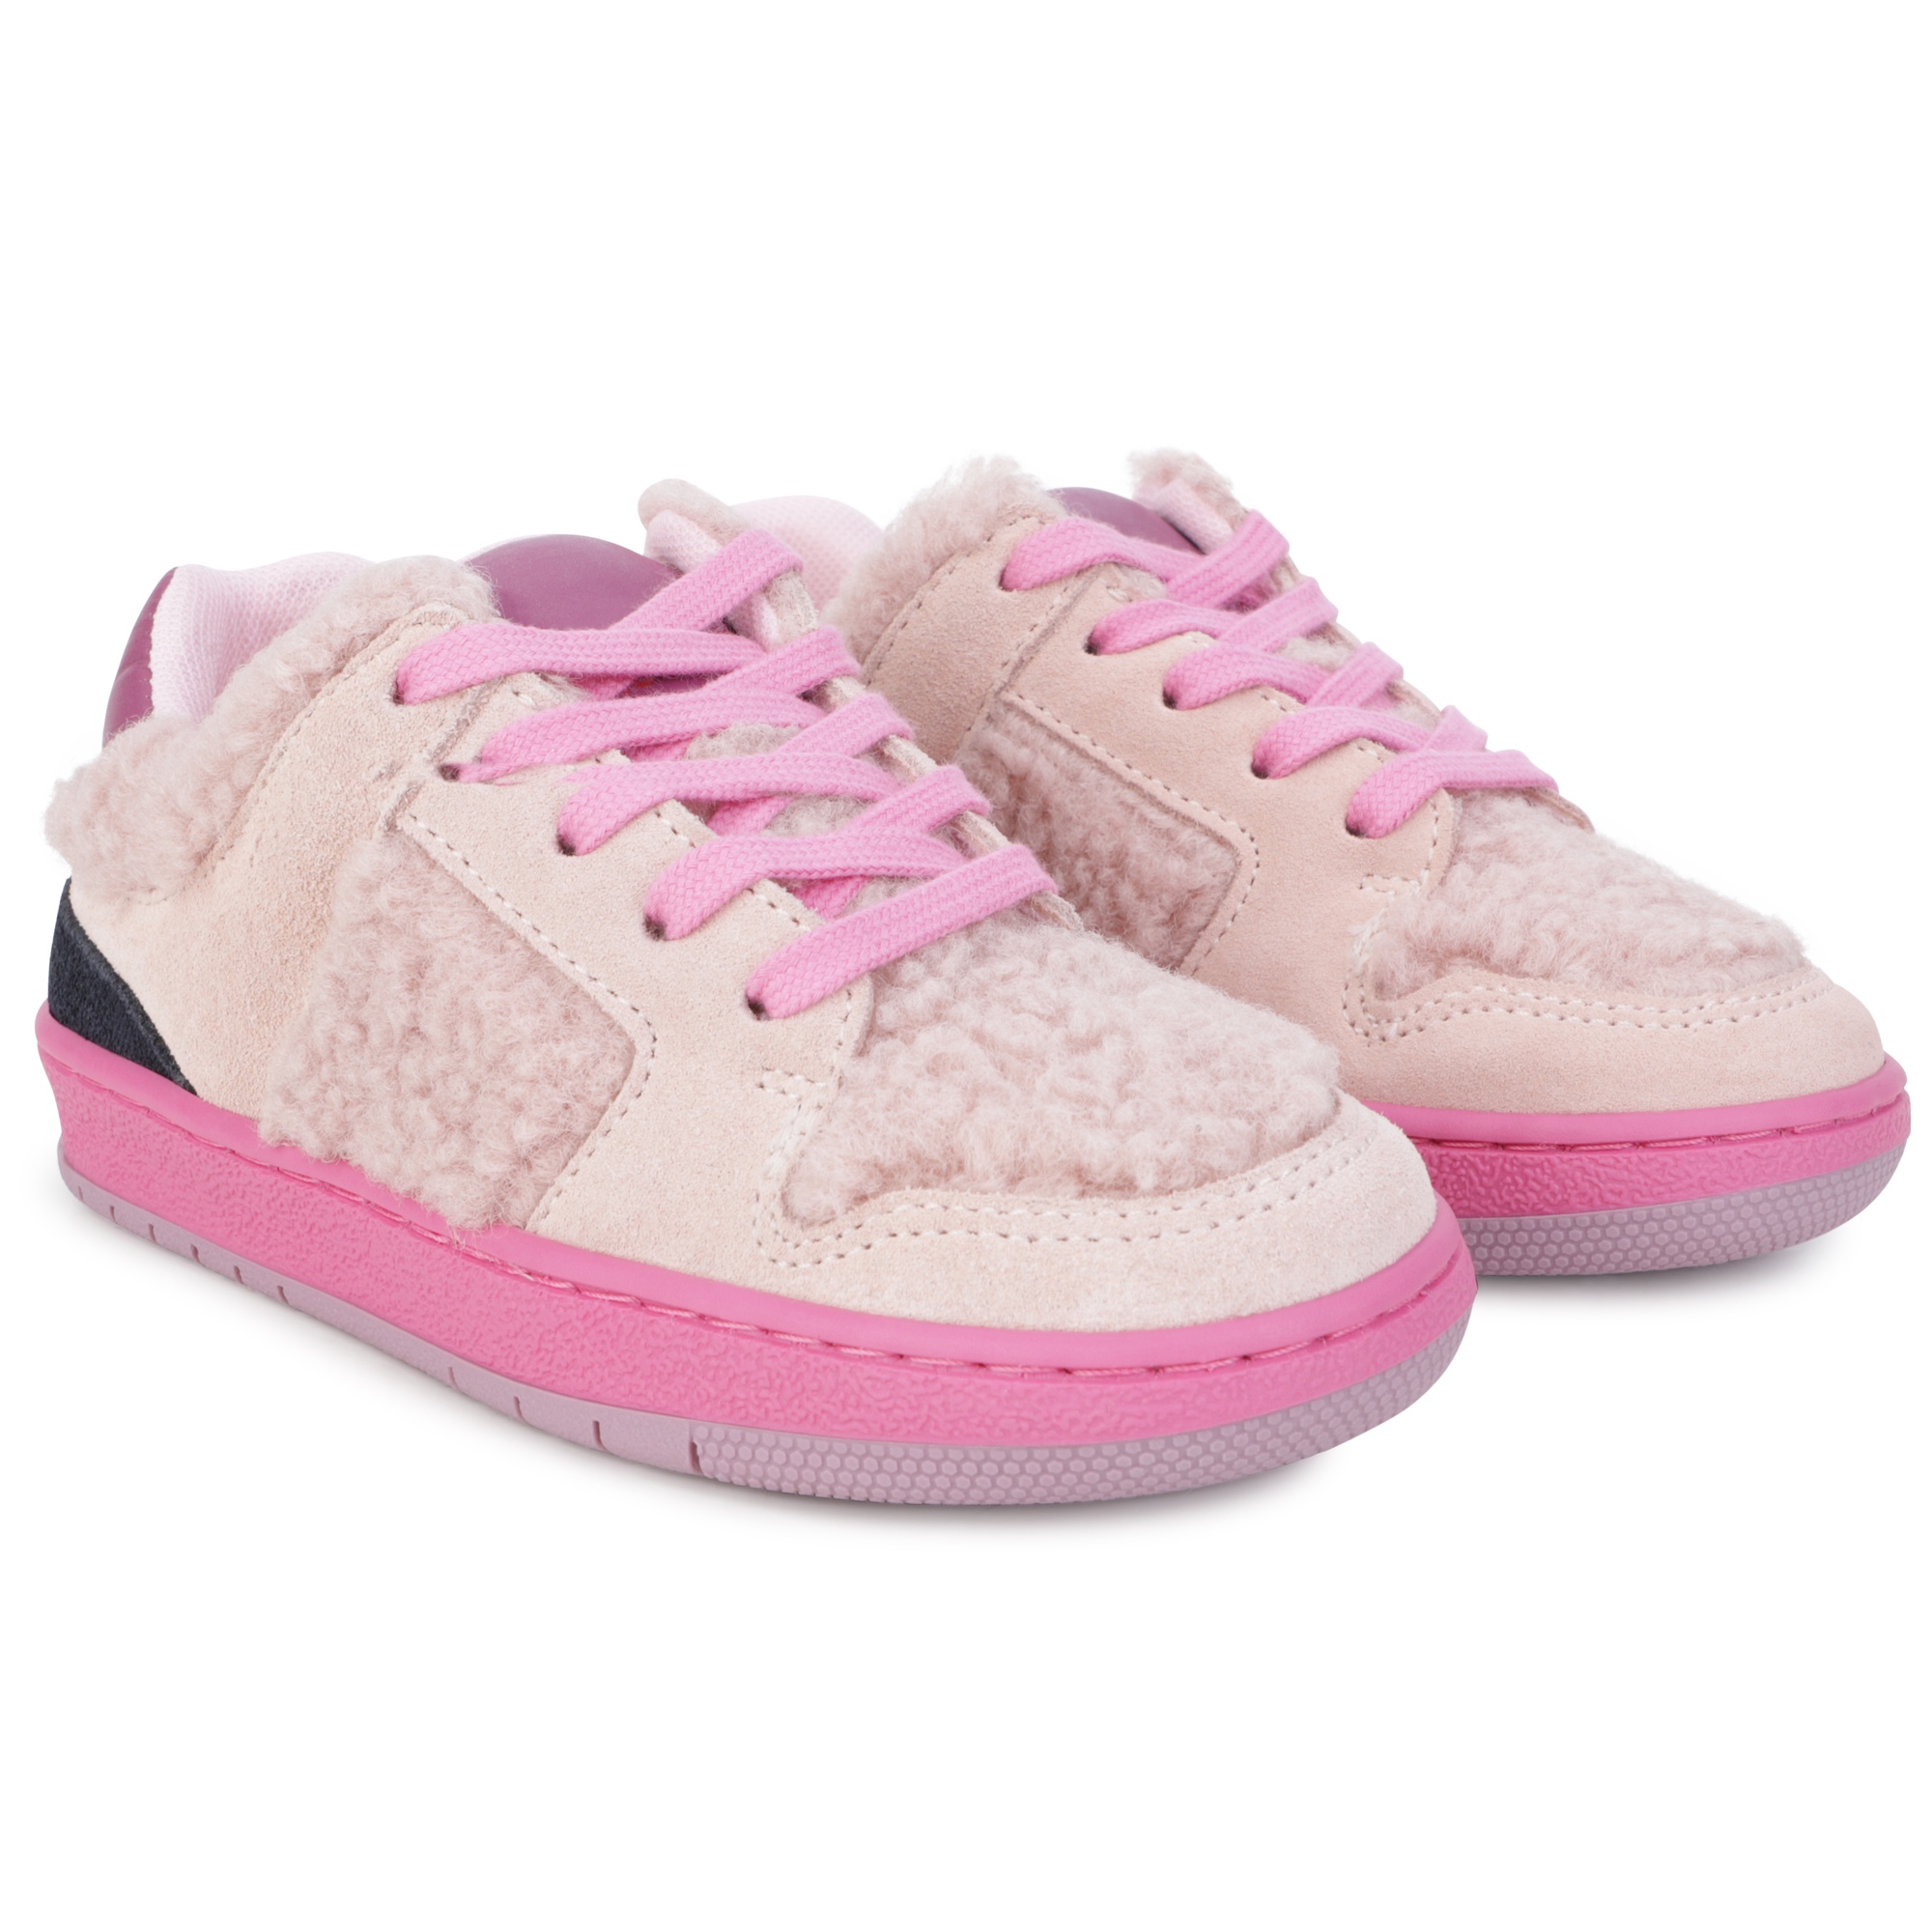 Sneakers MARC JACOBS for GIRL